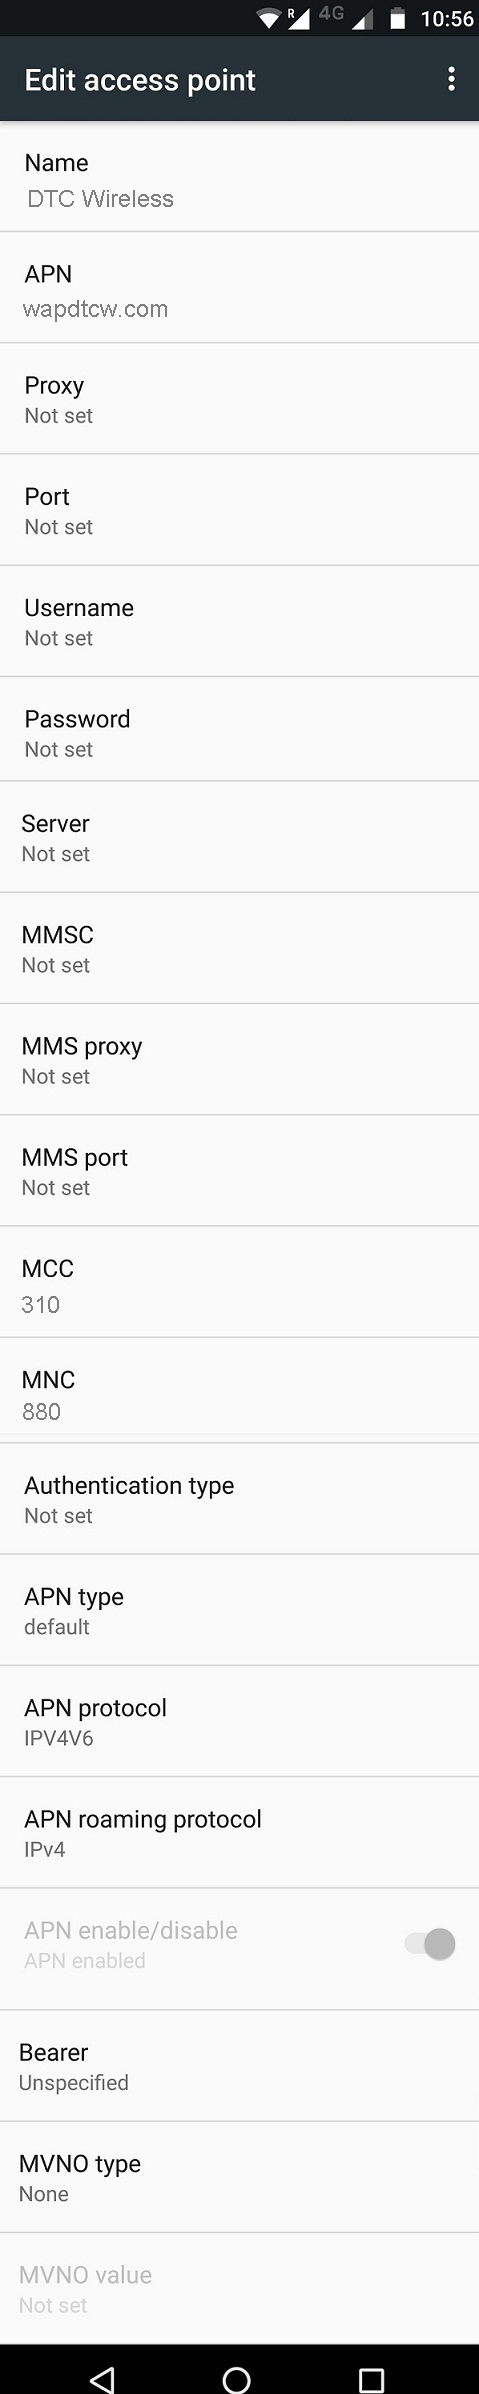 DTC Wireless Internet Settings for Android